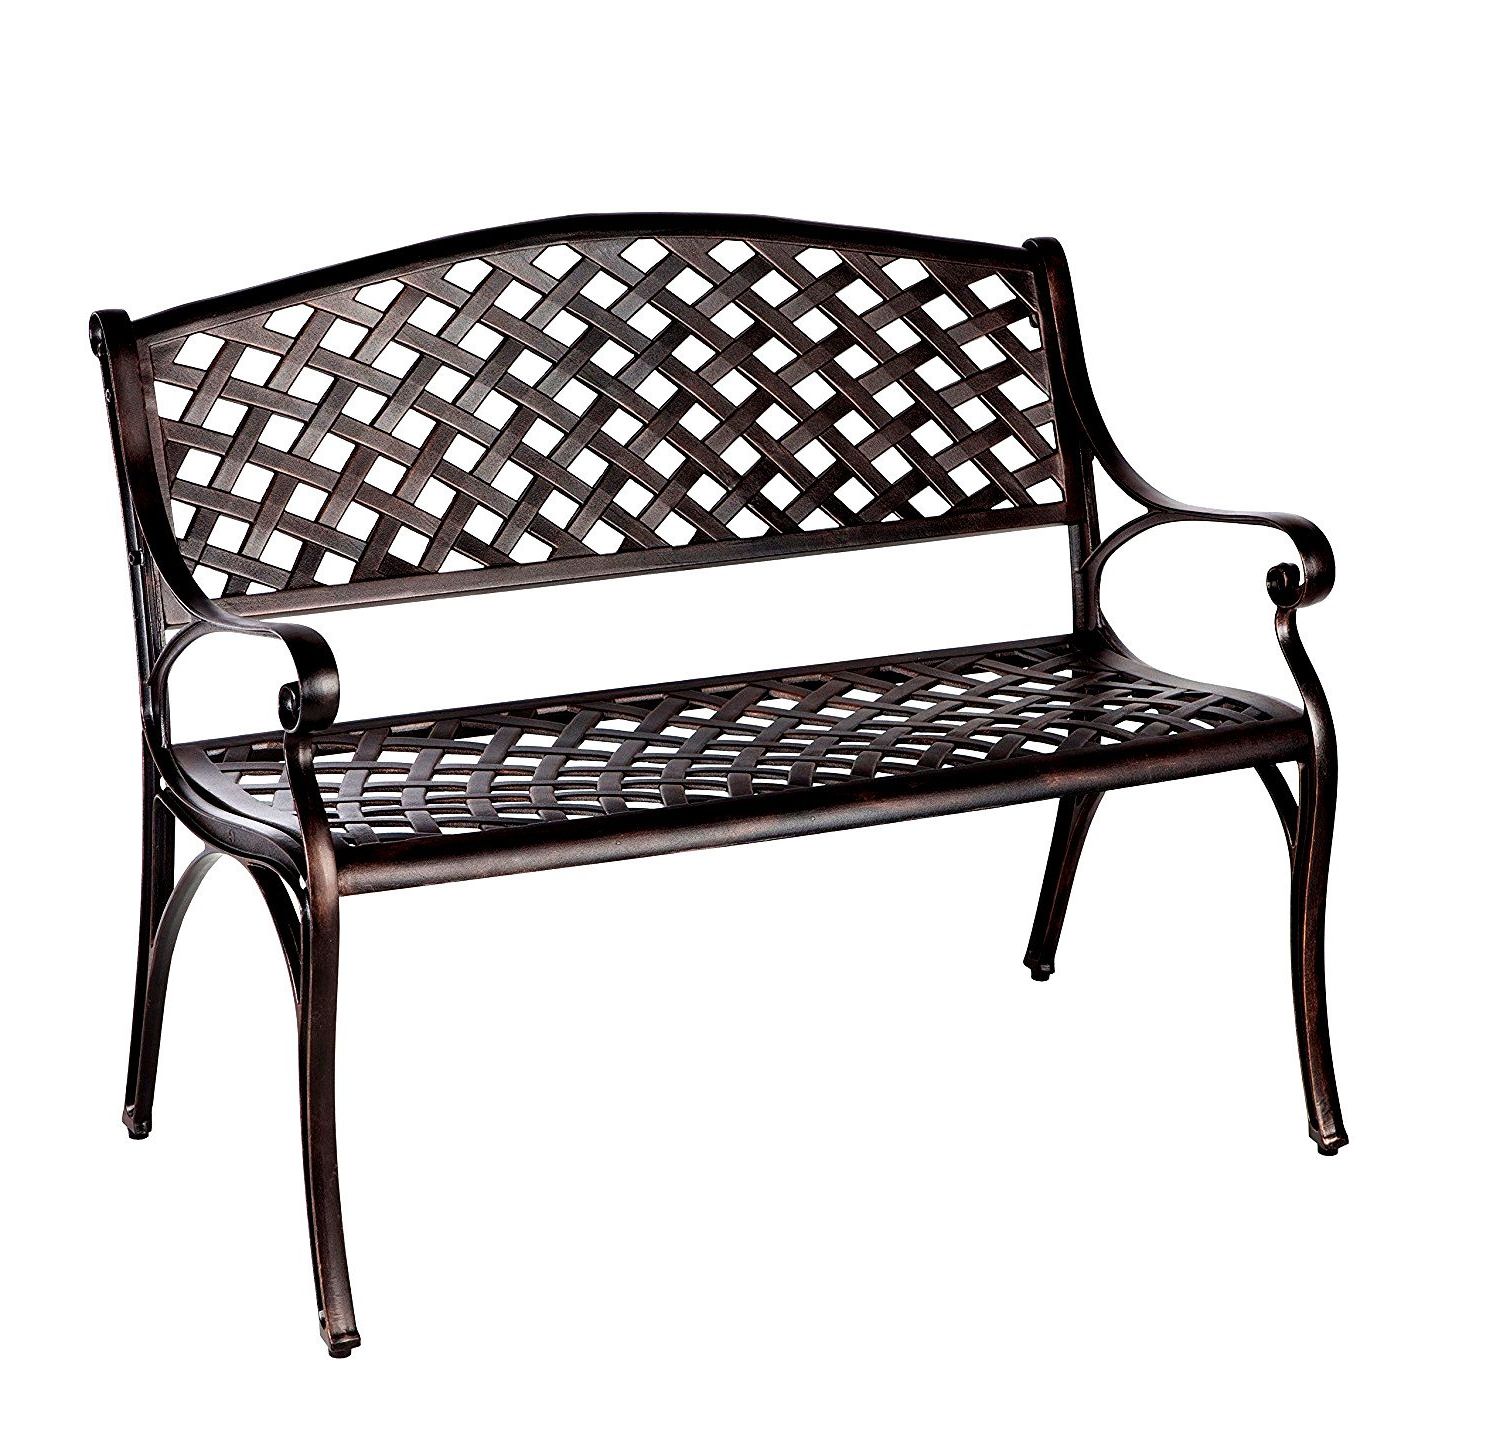 Amazon : Efd Two Person Bench Metal Aluminum Large Throughout Preferred 1 Person Antique Black Steel Outdoor Gliders (View 8 of 30)